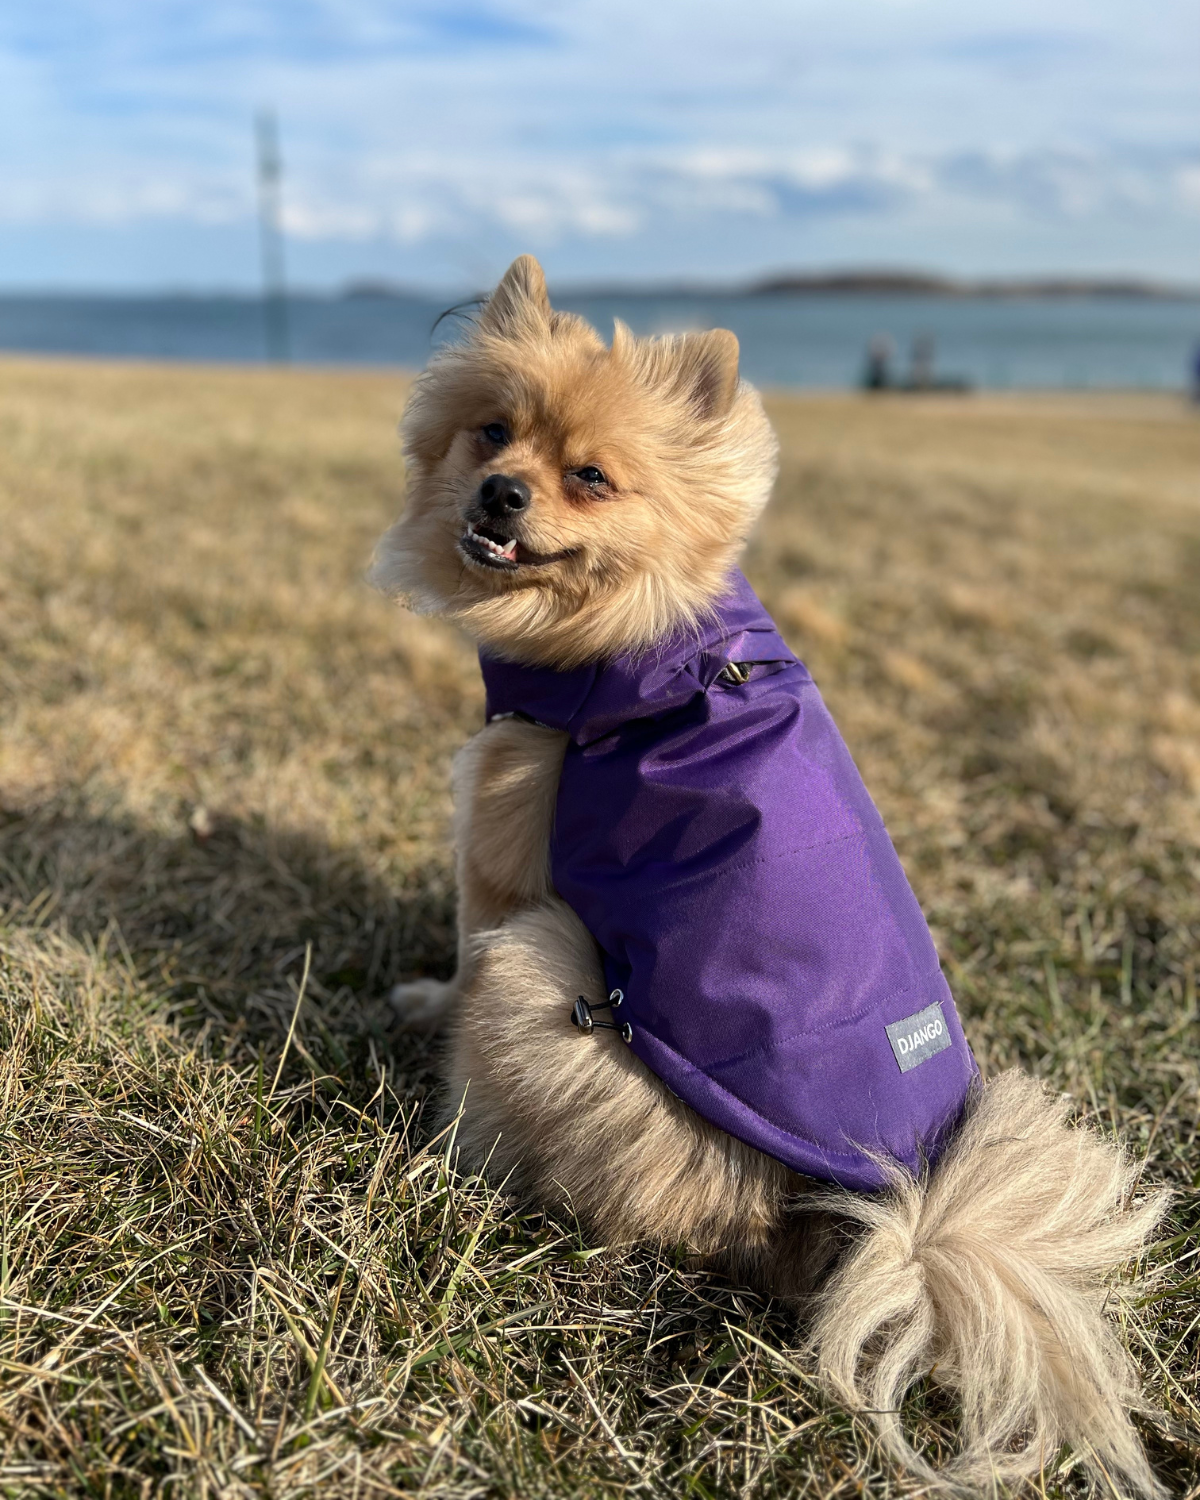 Time to play! Our adorable Pomeranian furend is wearing her DJANGO Reversible Puffer Dog Coat in color Violet Purple, size medium. DJANGO's puffer dog coat is comfortable, insulated, and water-repellent and designed for chilly autumn days, snowy winter walks, and rainy spring showers - djangobrand.com